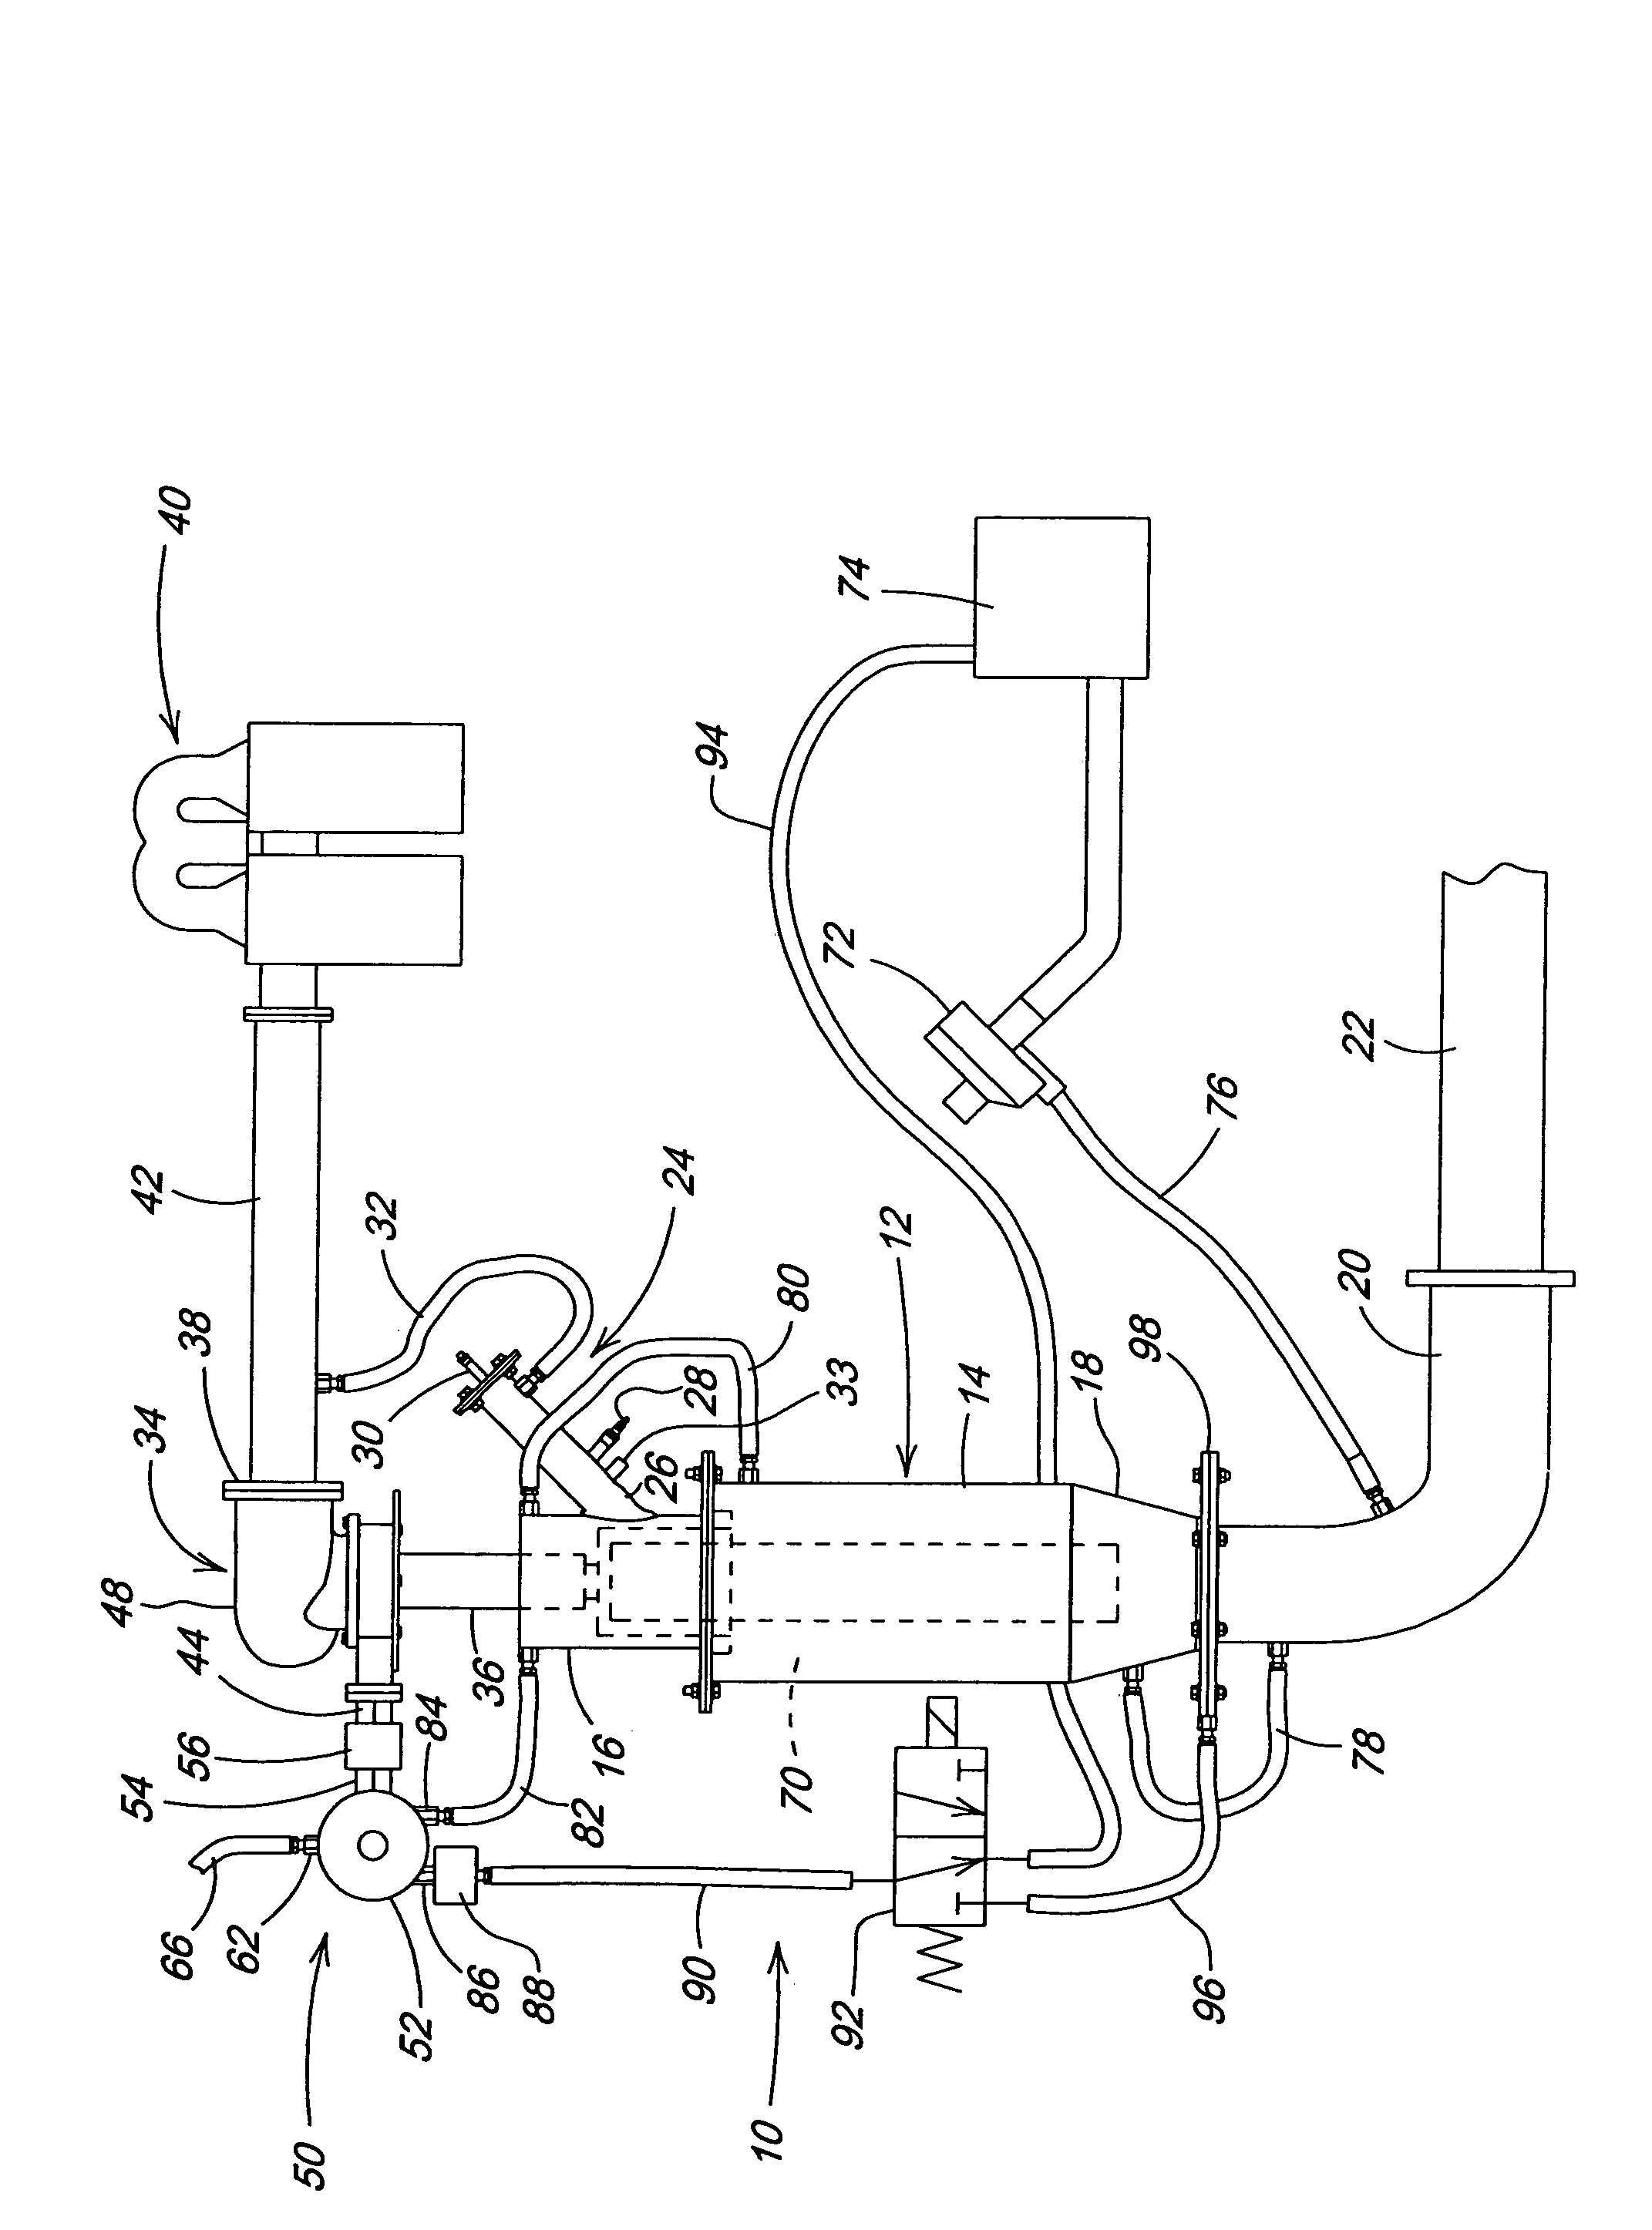 Crop re-hydration system utilizing a direct-fired steam generator having continuous water circulation